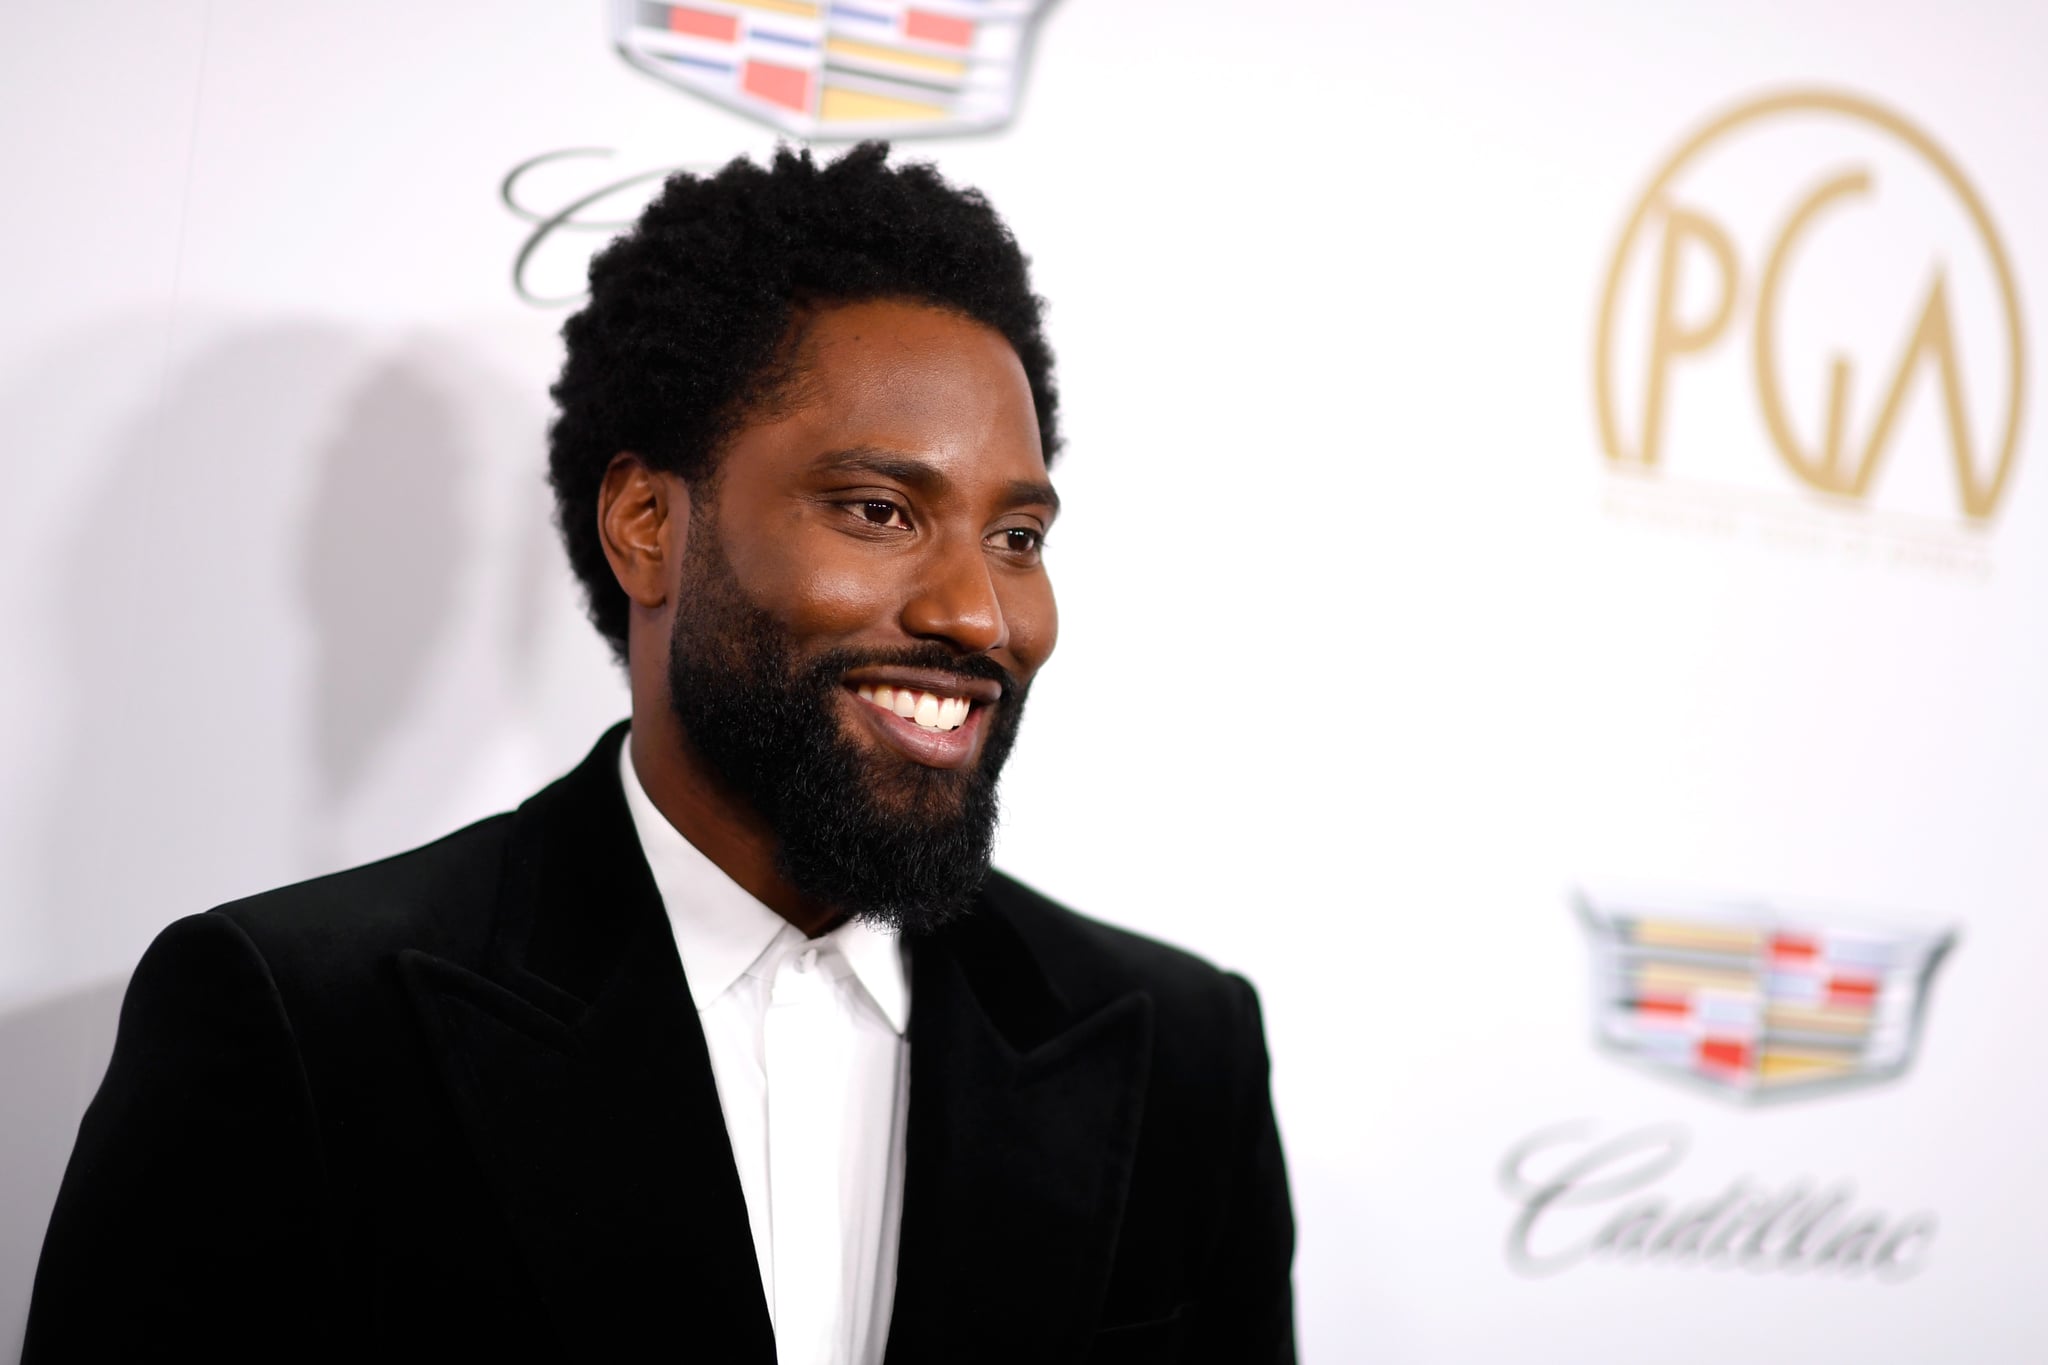 BEVERLY HILLS, CA - JANUARY 19:  John David Washington attends the 30th annual Producers Guild Awards at The Beverly Hilton Hotel on January 19, 2019 in Beverly Hills, California.  (Photo by Frazer Harrison/Getty Images)